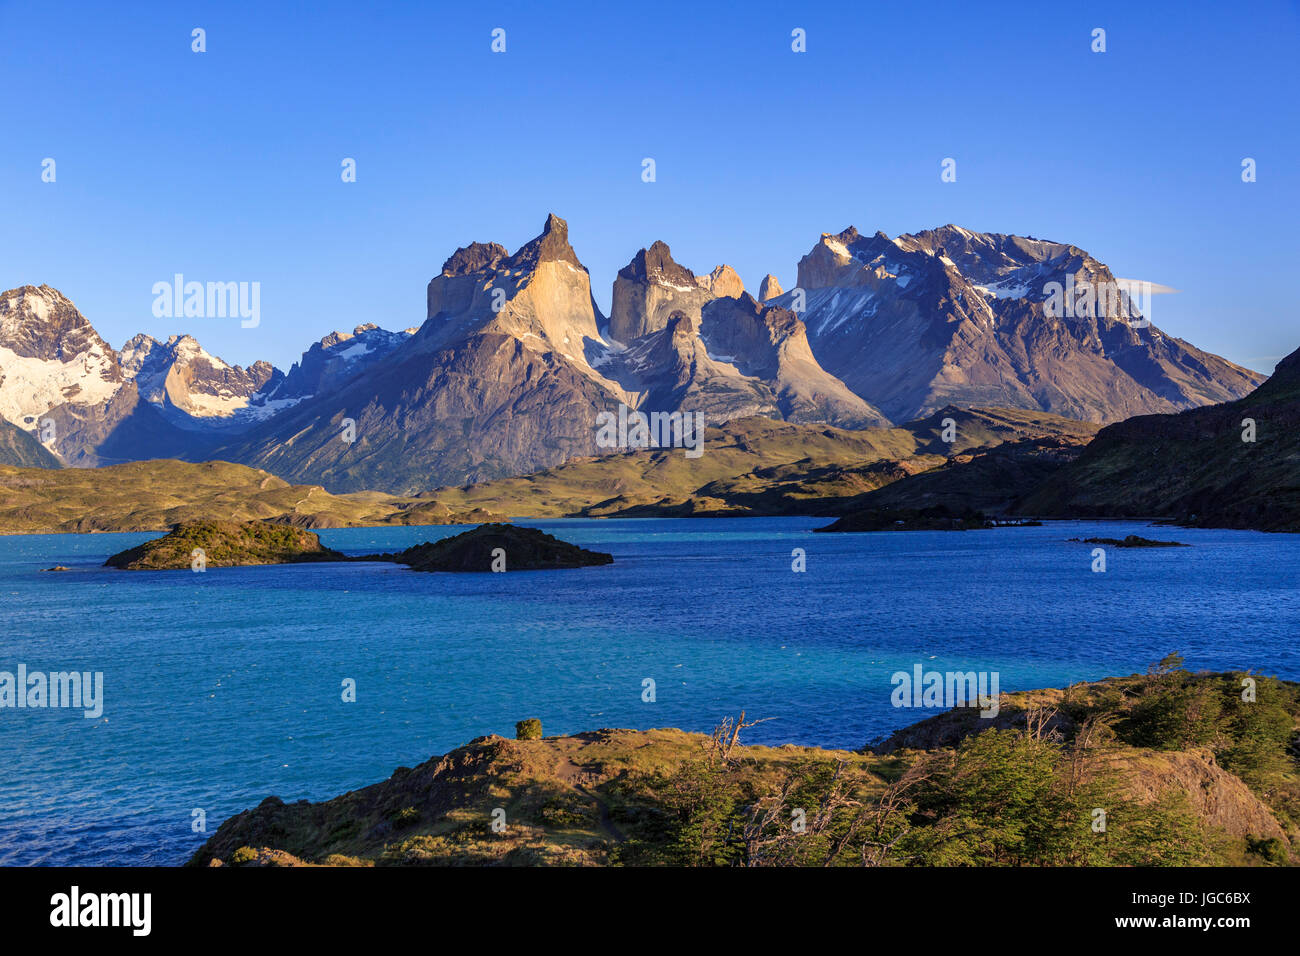 Lago Pehoe, Parco Nazionale Torres del Paine, Patagonia, Cile Foto Stock